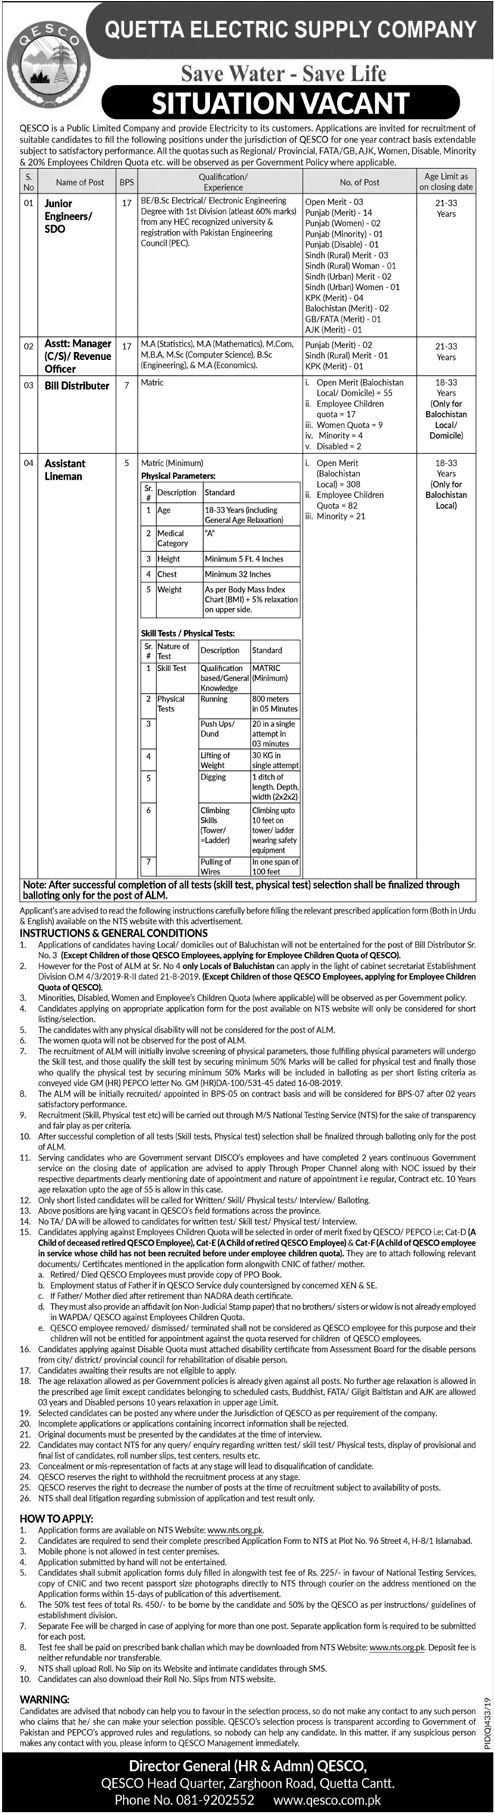 Jobs In Quetta Electricity Supply Company QESCO 07 October 2019